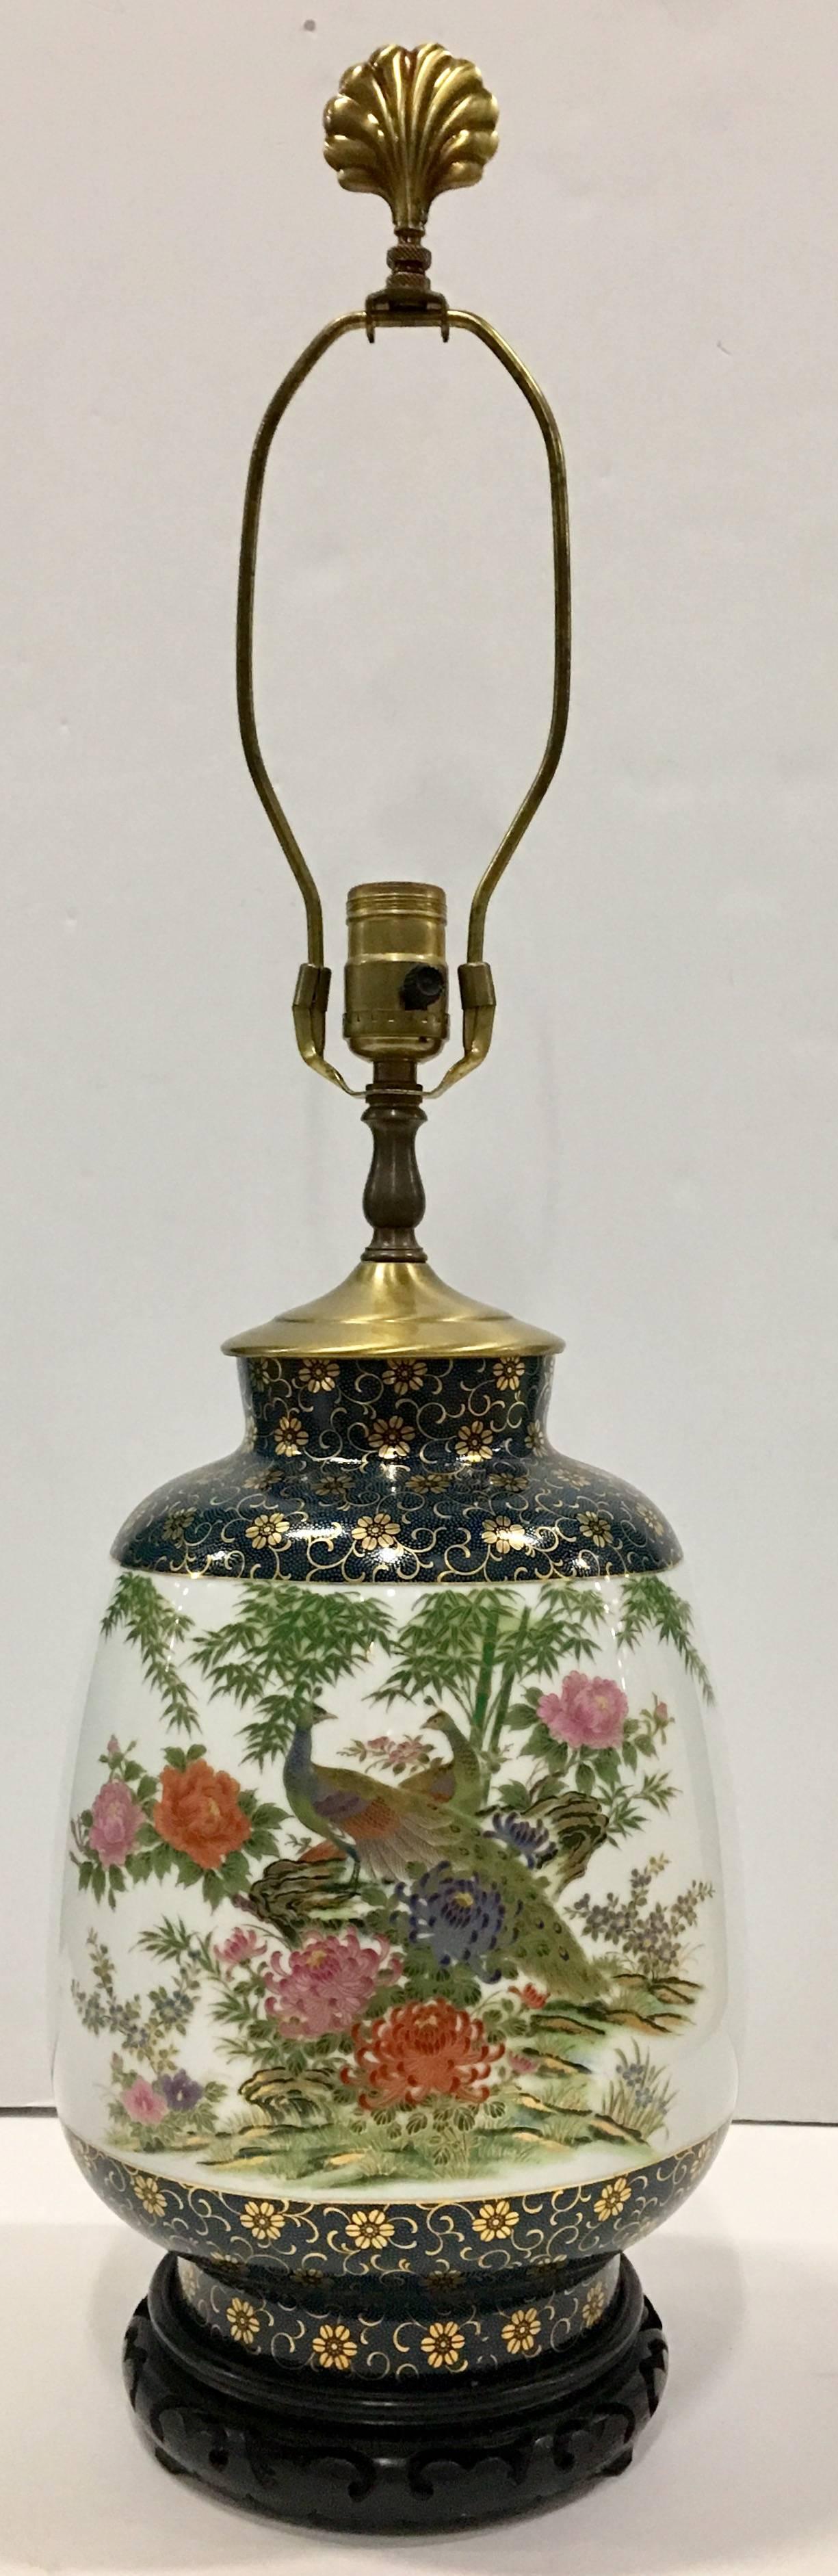 Stunning Asian Style hand-painted with gilt detail peacock motif lamp on rosewood carved base and brass fittings. Includes brass harp and brass shell motif finial. Wired for the US and in working order. Height to socket 19.25